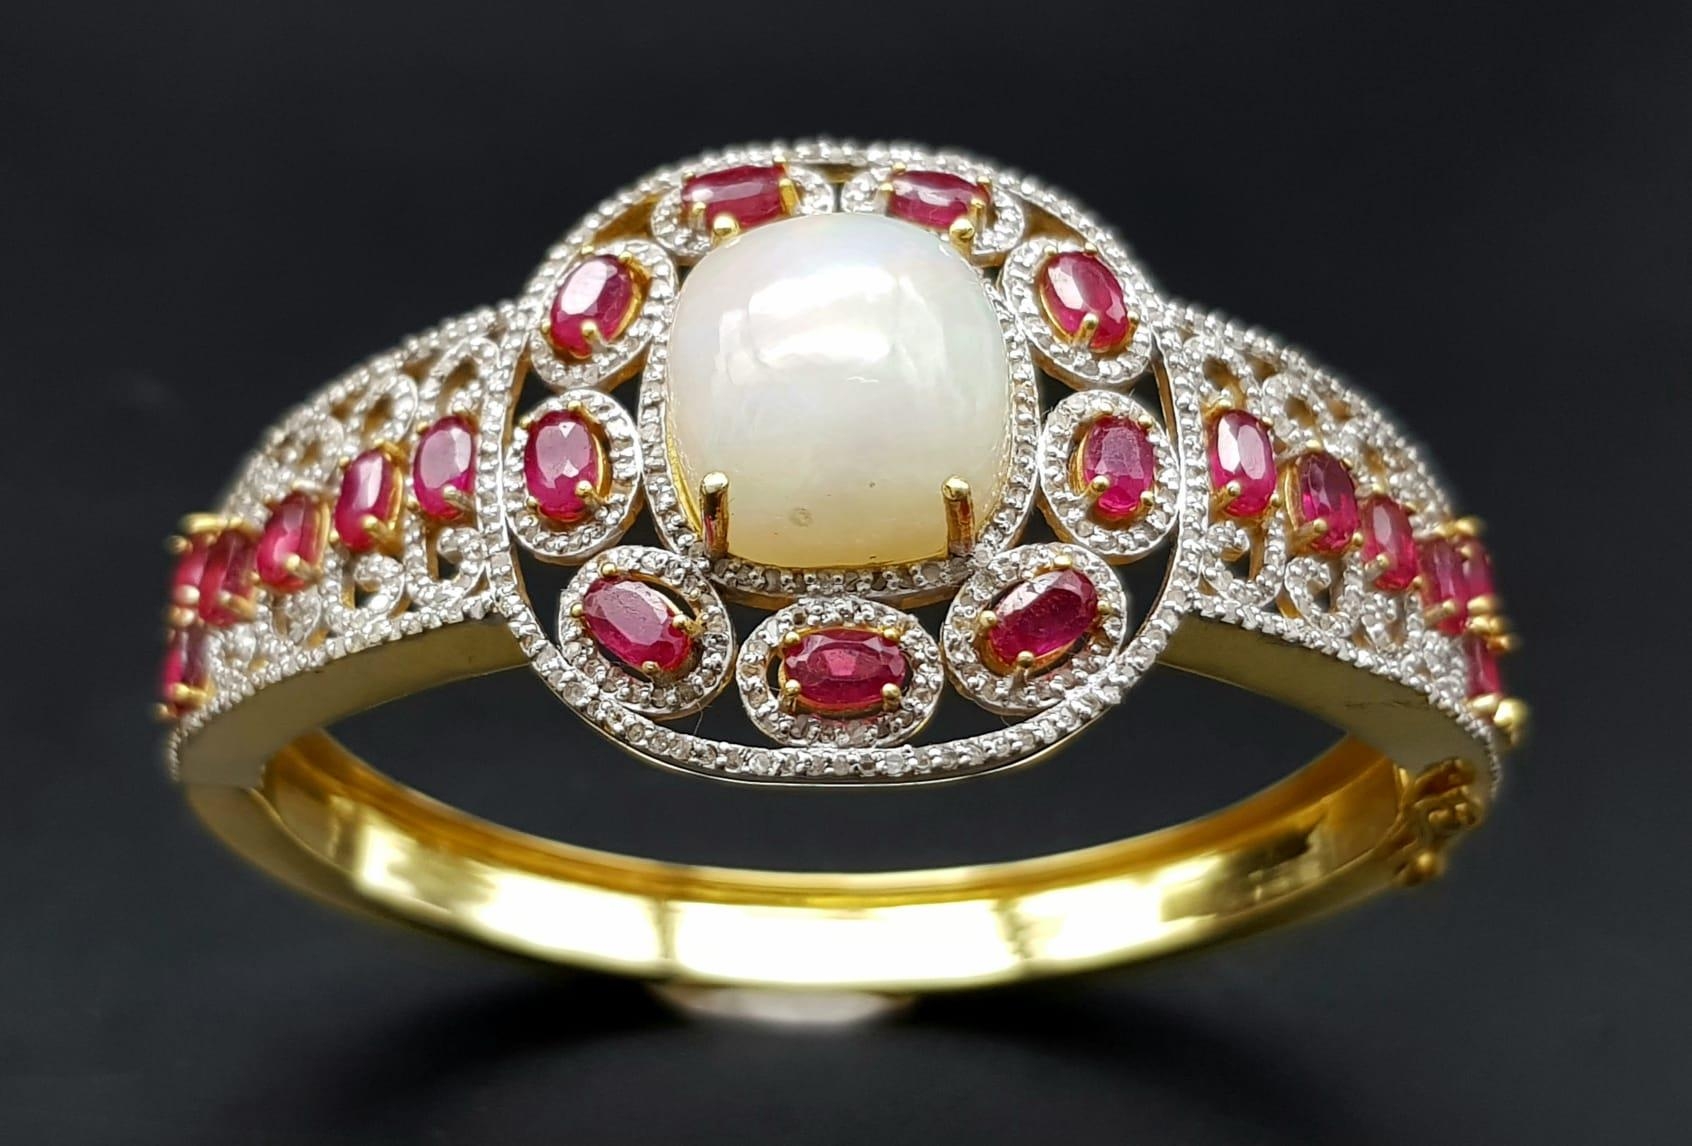 A Wonderful Majestic Colour-Play 12ct Opal and Ruby Gemstone Cuff Bracelet with Diamond Accents. - Image 2 of 6